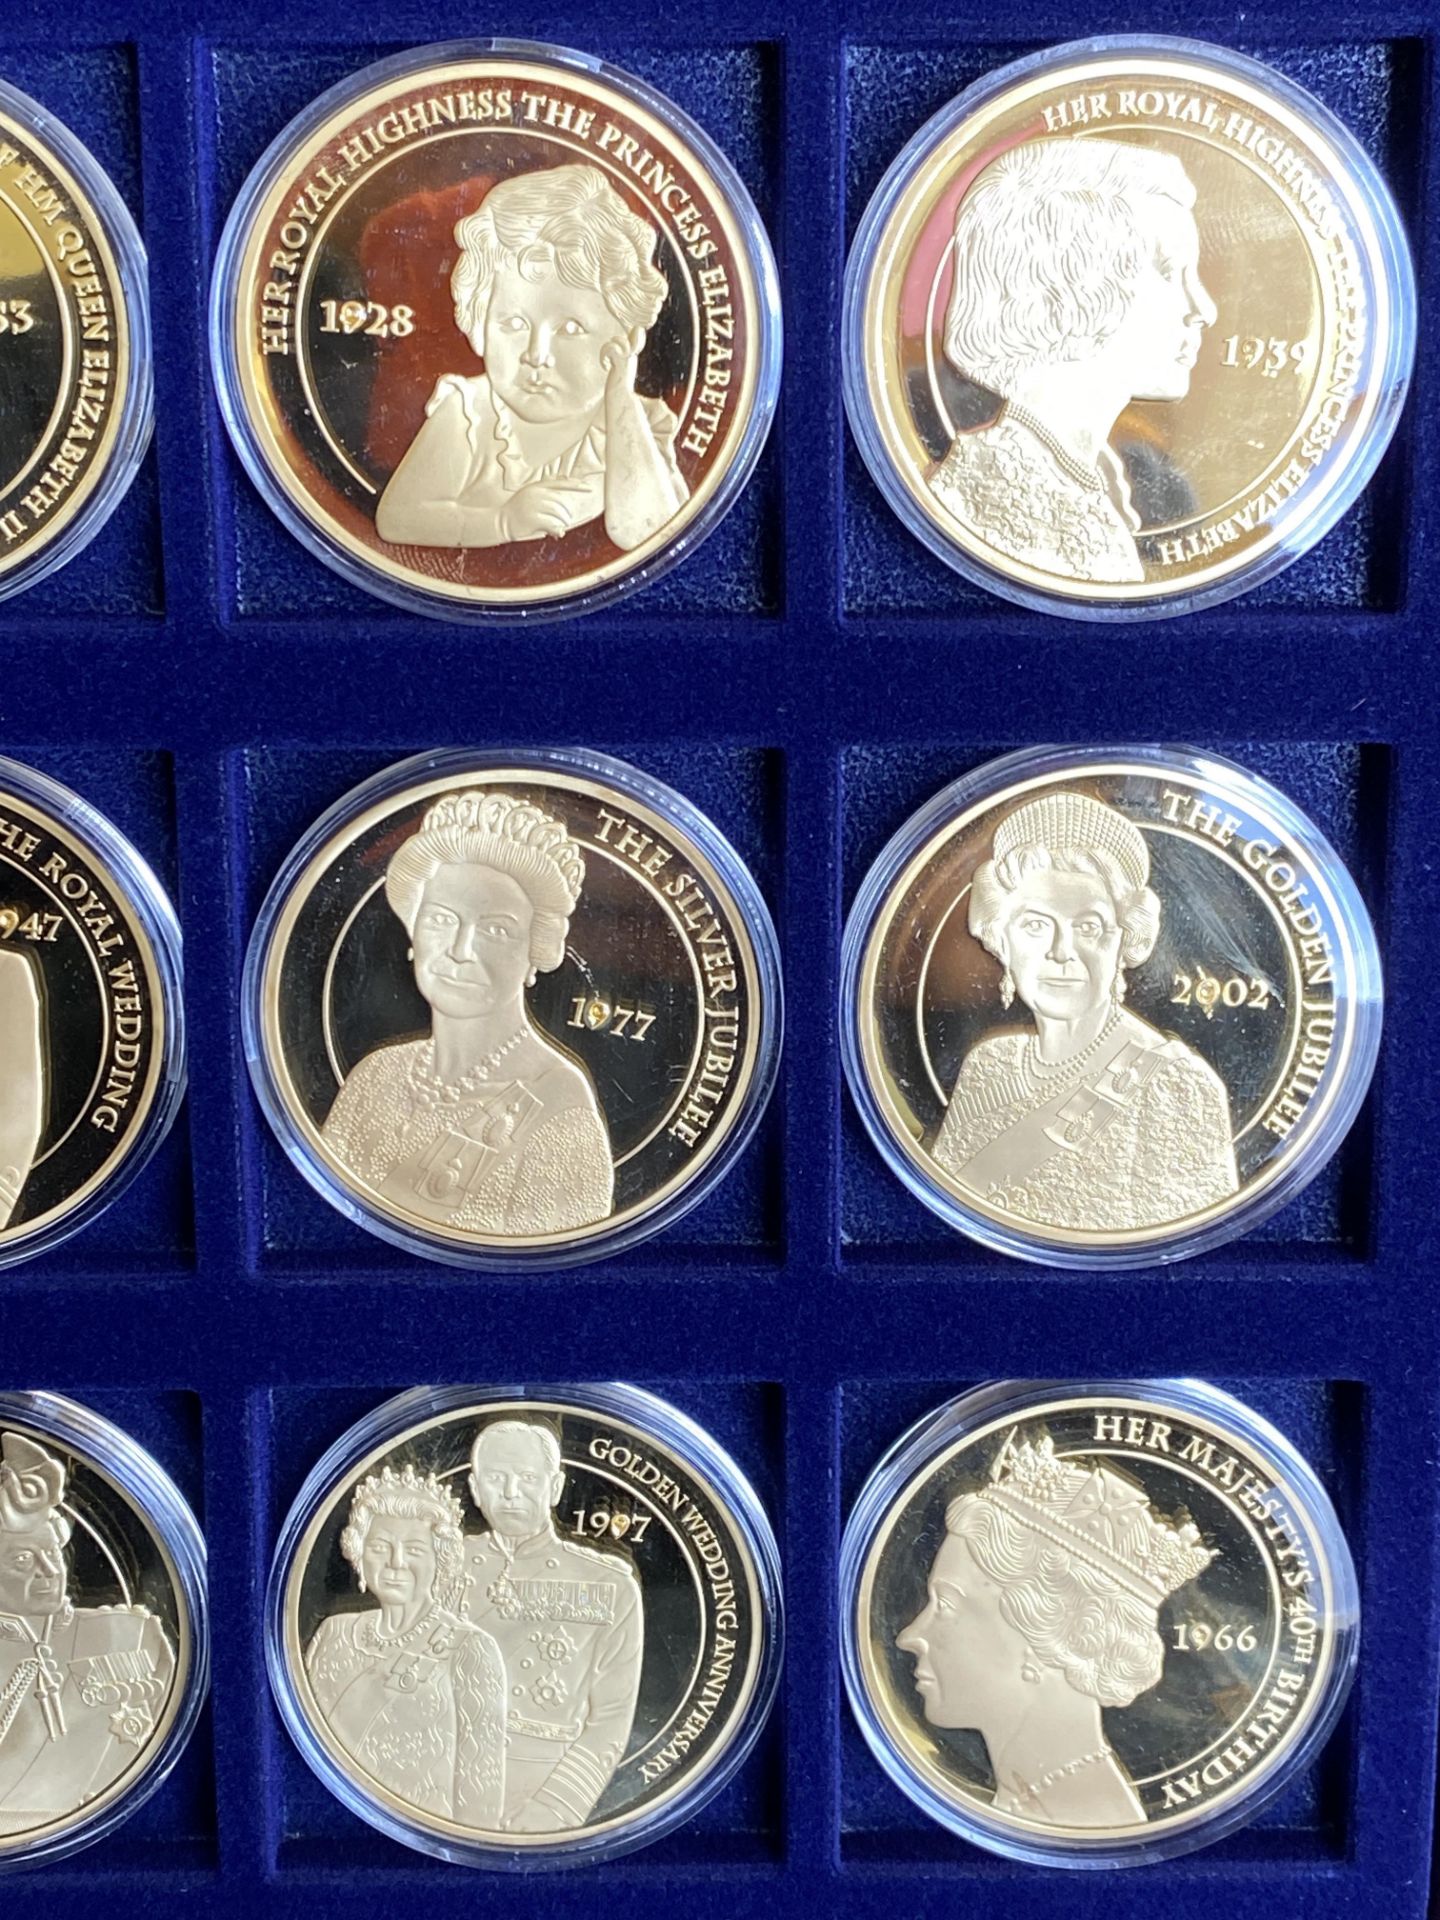 Twelve gold plated Portraits of the Queen Diamond Jubilee coins in presentation box - Image 2 of 4